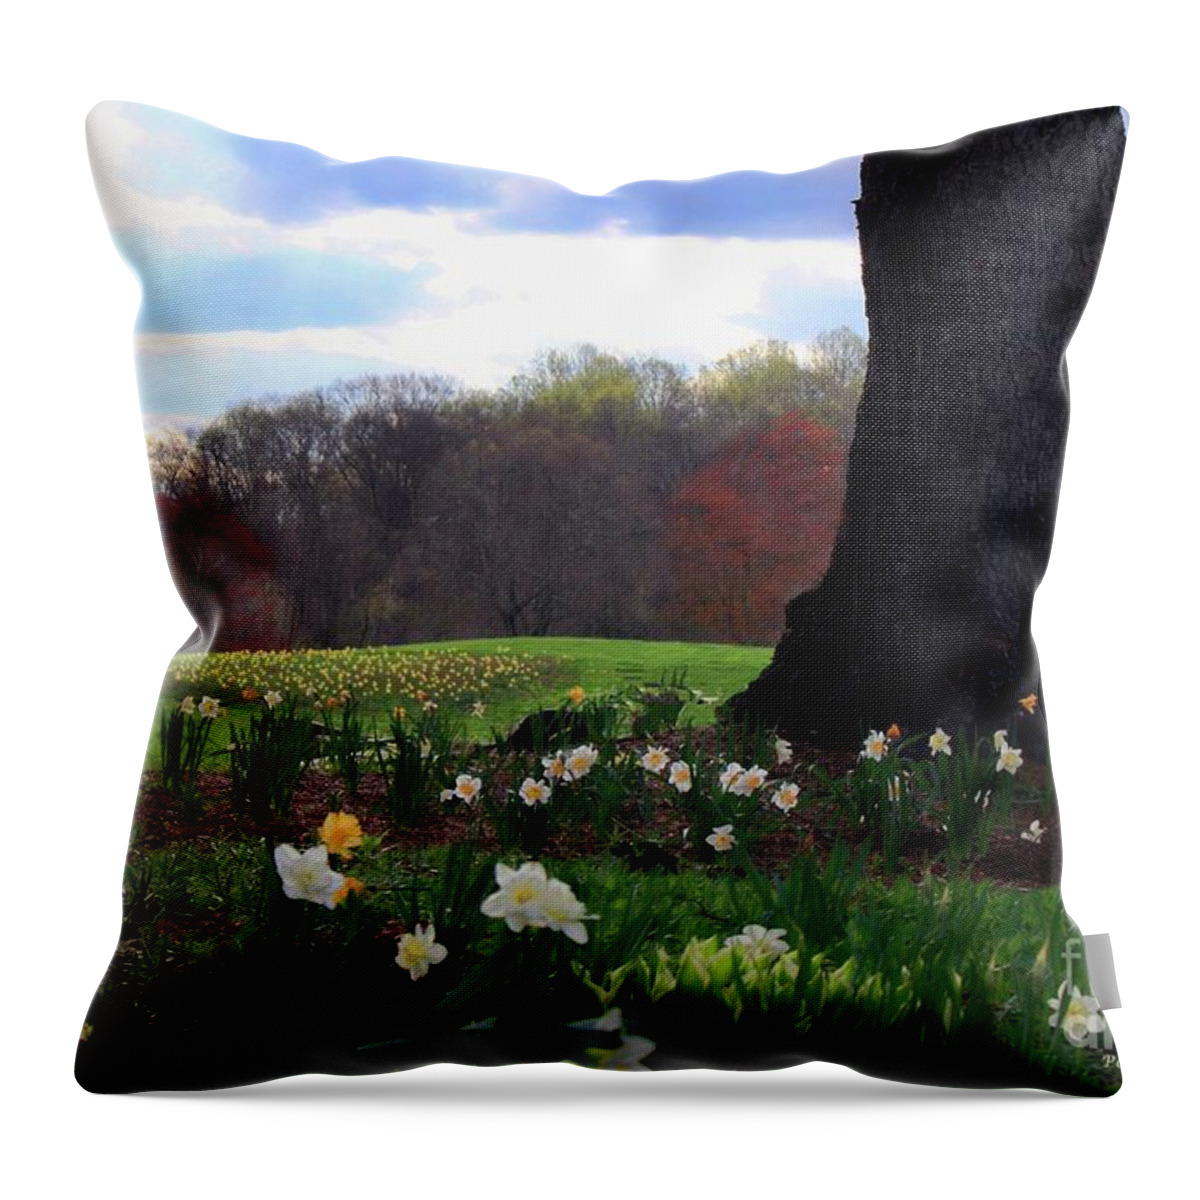 Edgemont Golf Course Newtown Square Pa Throw Pillow featuring the photograph Springing Forward at Edgemont Golf Course by Polly Peacock